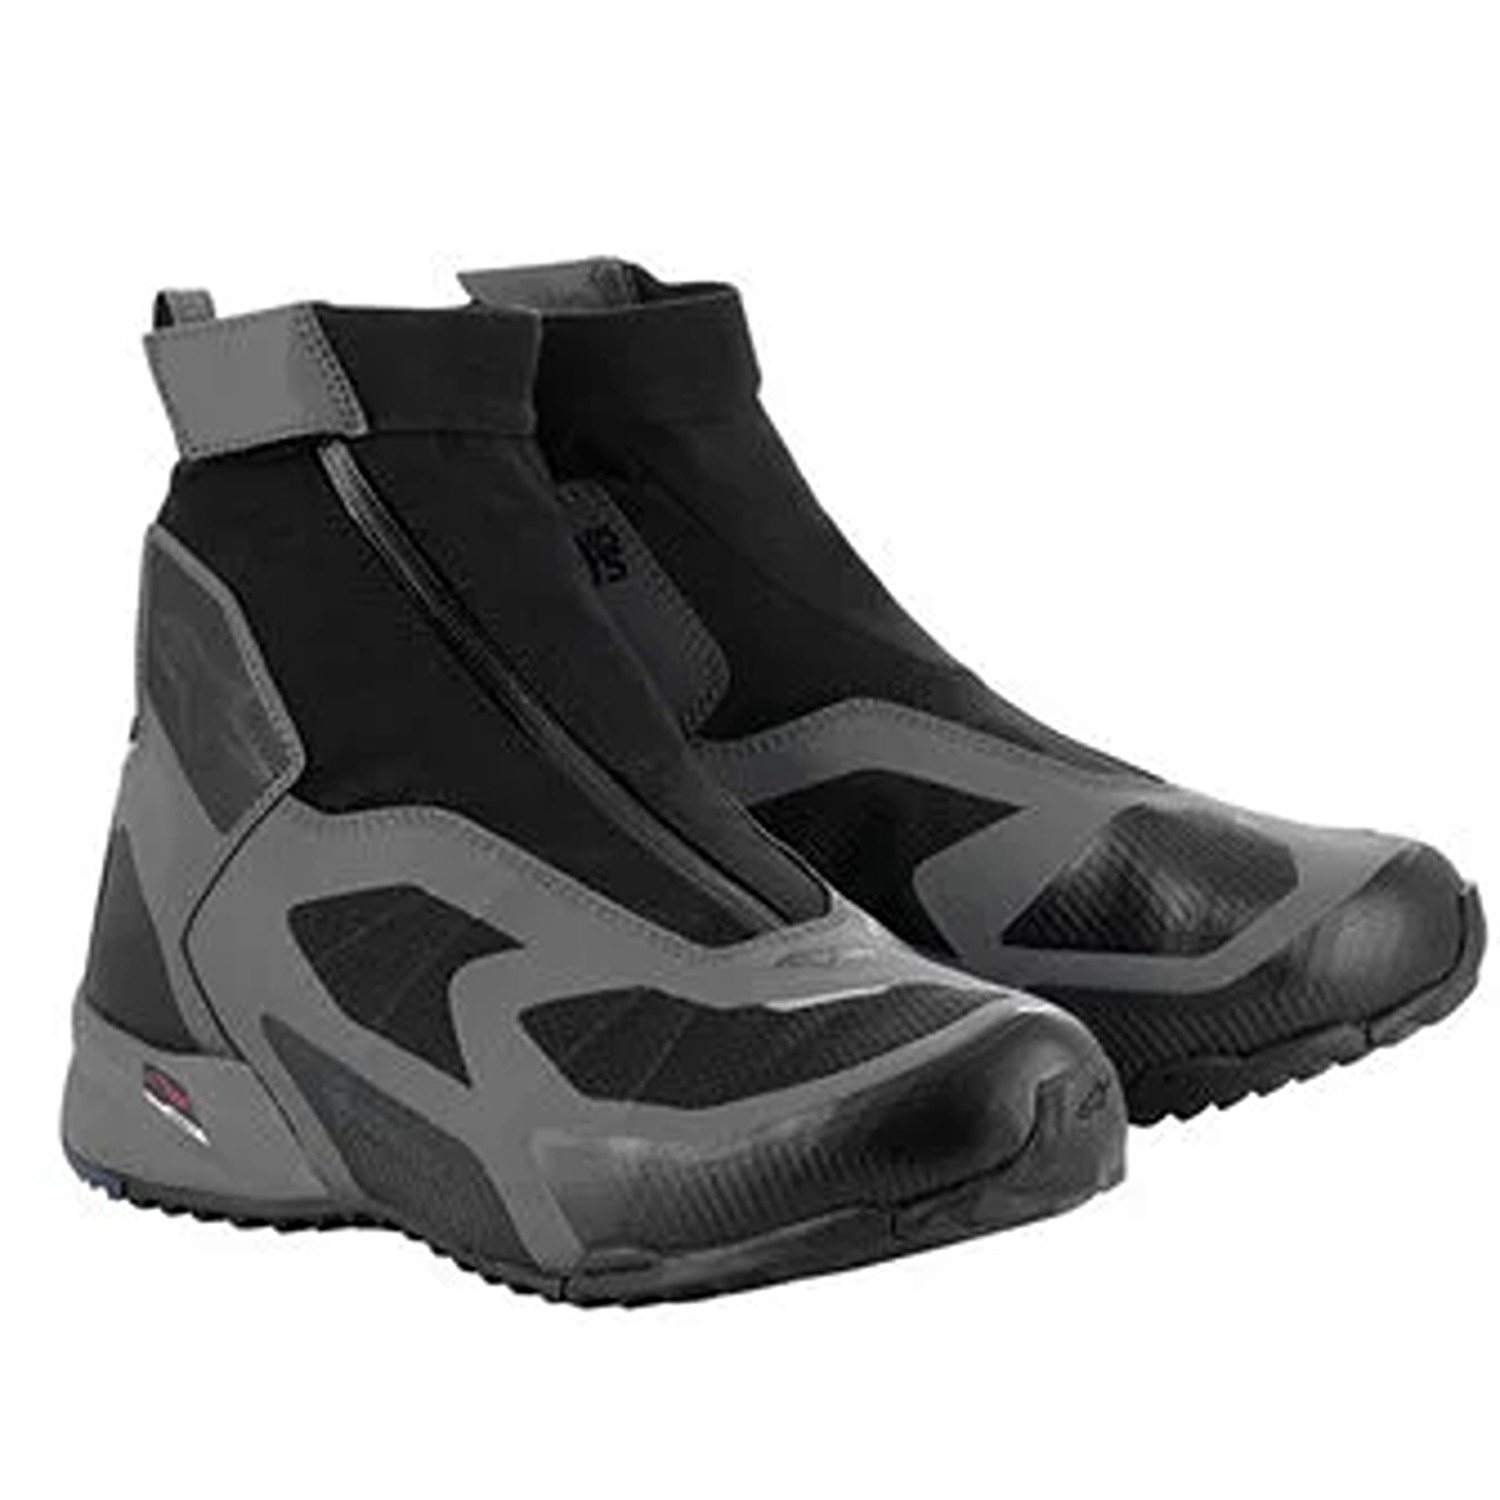 Image of EU Alpinestars CR-8 Gore-Tex Shoes Black Mid Gray Bright Red Taille US 85